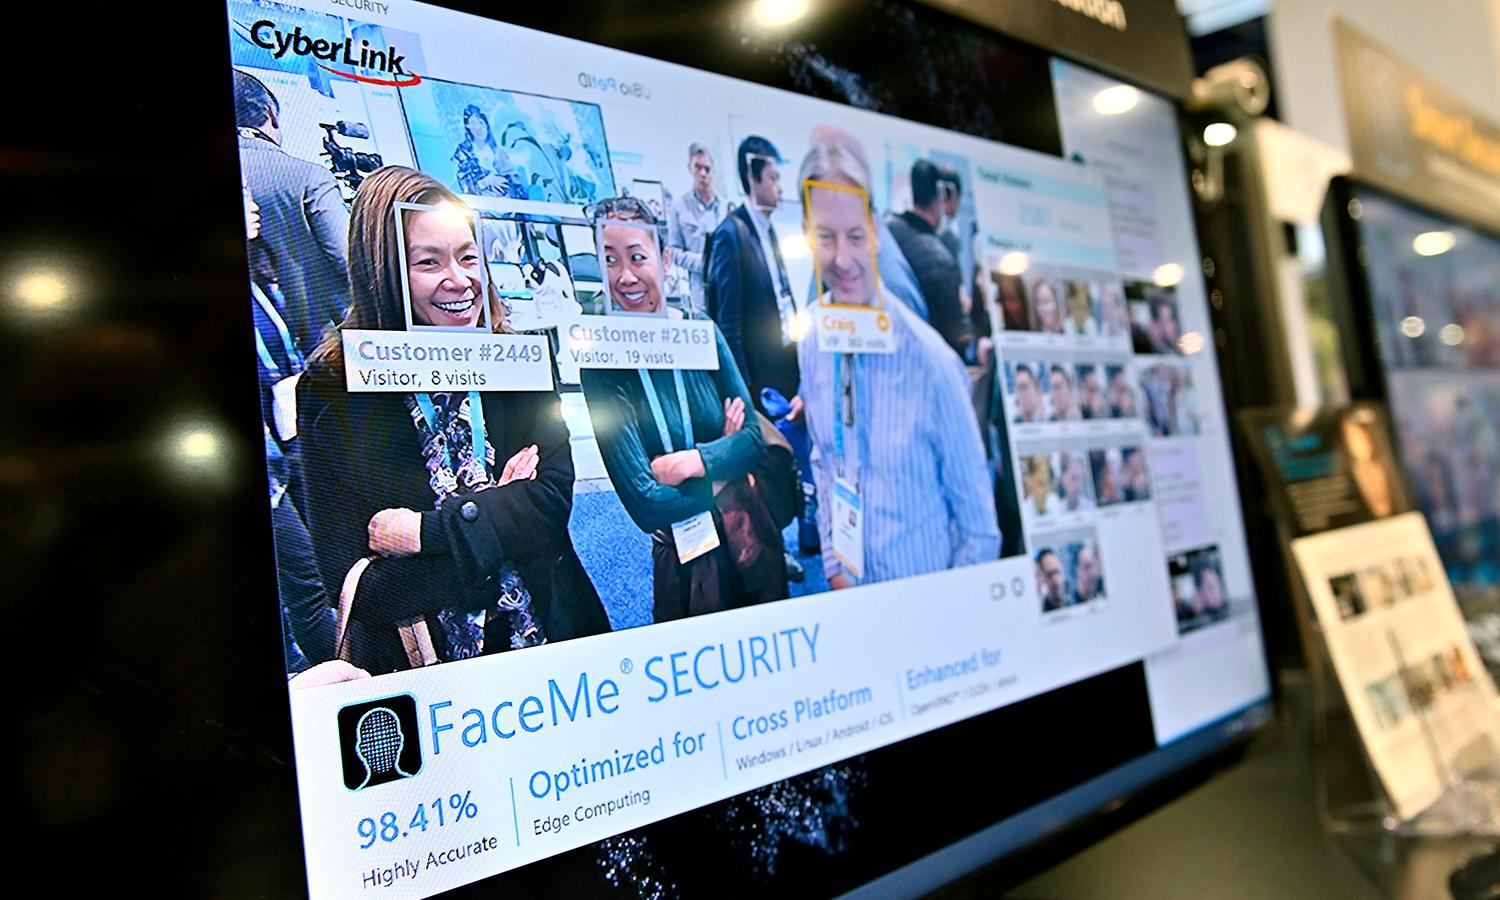 Today’s columnist, Aaron Barr of PiiQ Media, says companies have to educate their staffs and monitor the potential security abuses caused by facial recognition technology.(Photo by David Becker/Getty Images)